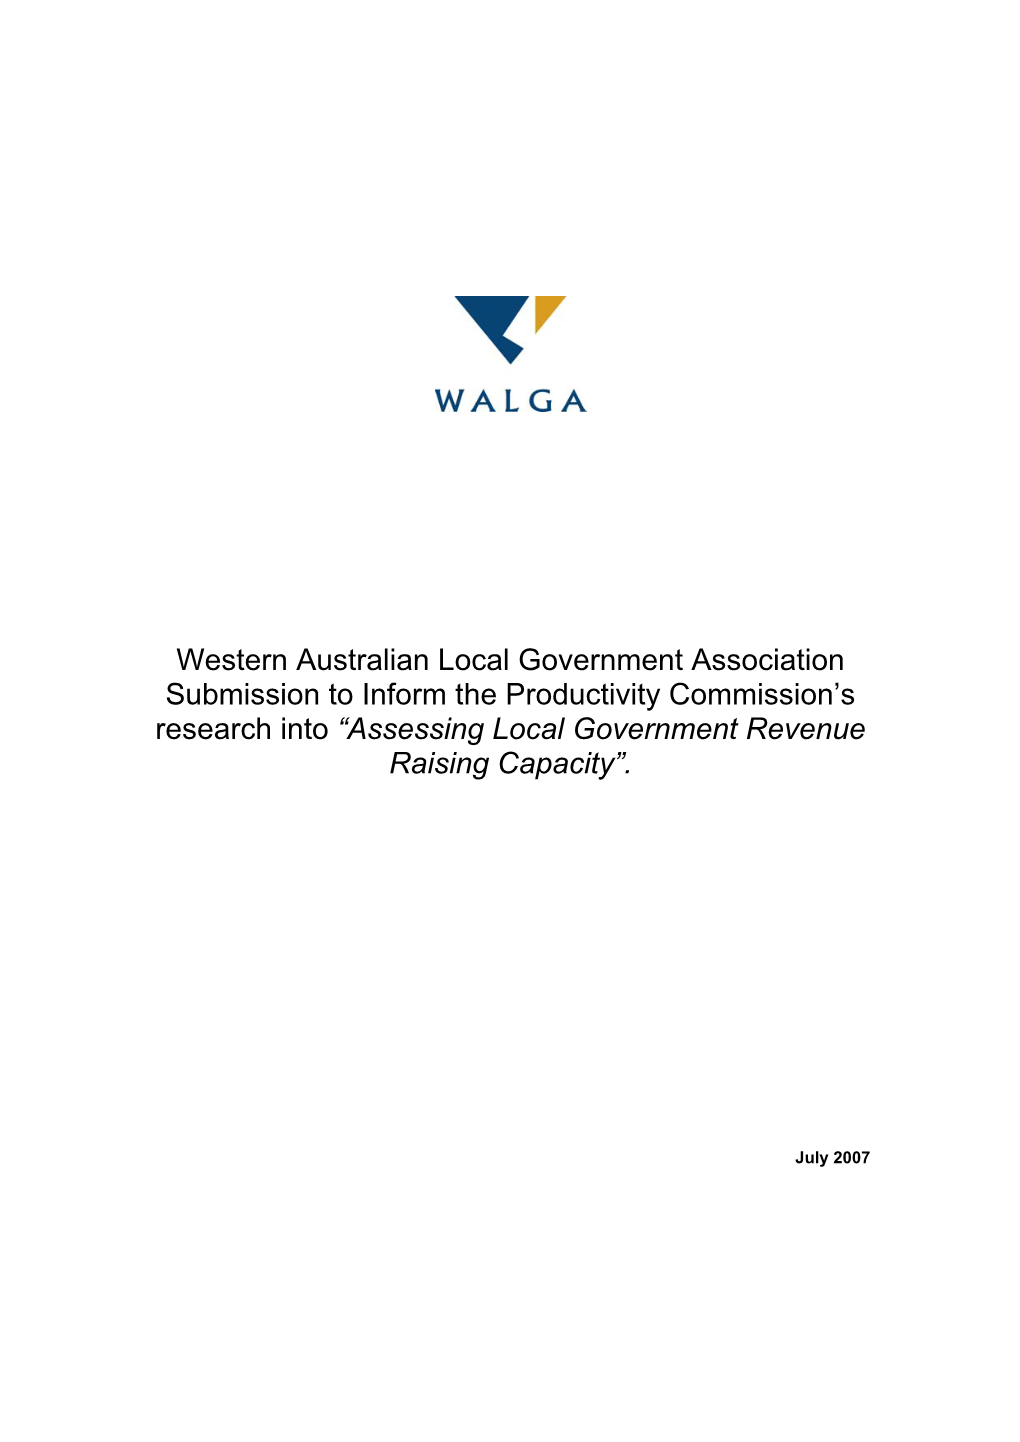 Western Australian Local Government Association Submission to Inform the Productivity Commission’S Research Into “Assessing Local Government Revenue Raising Capacity”